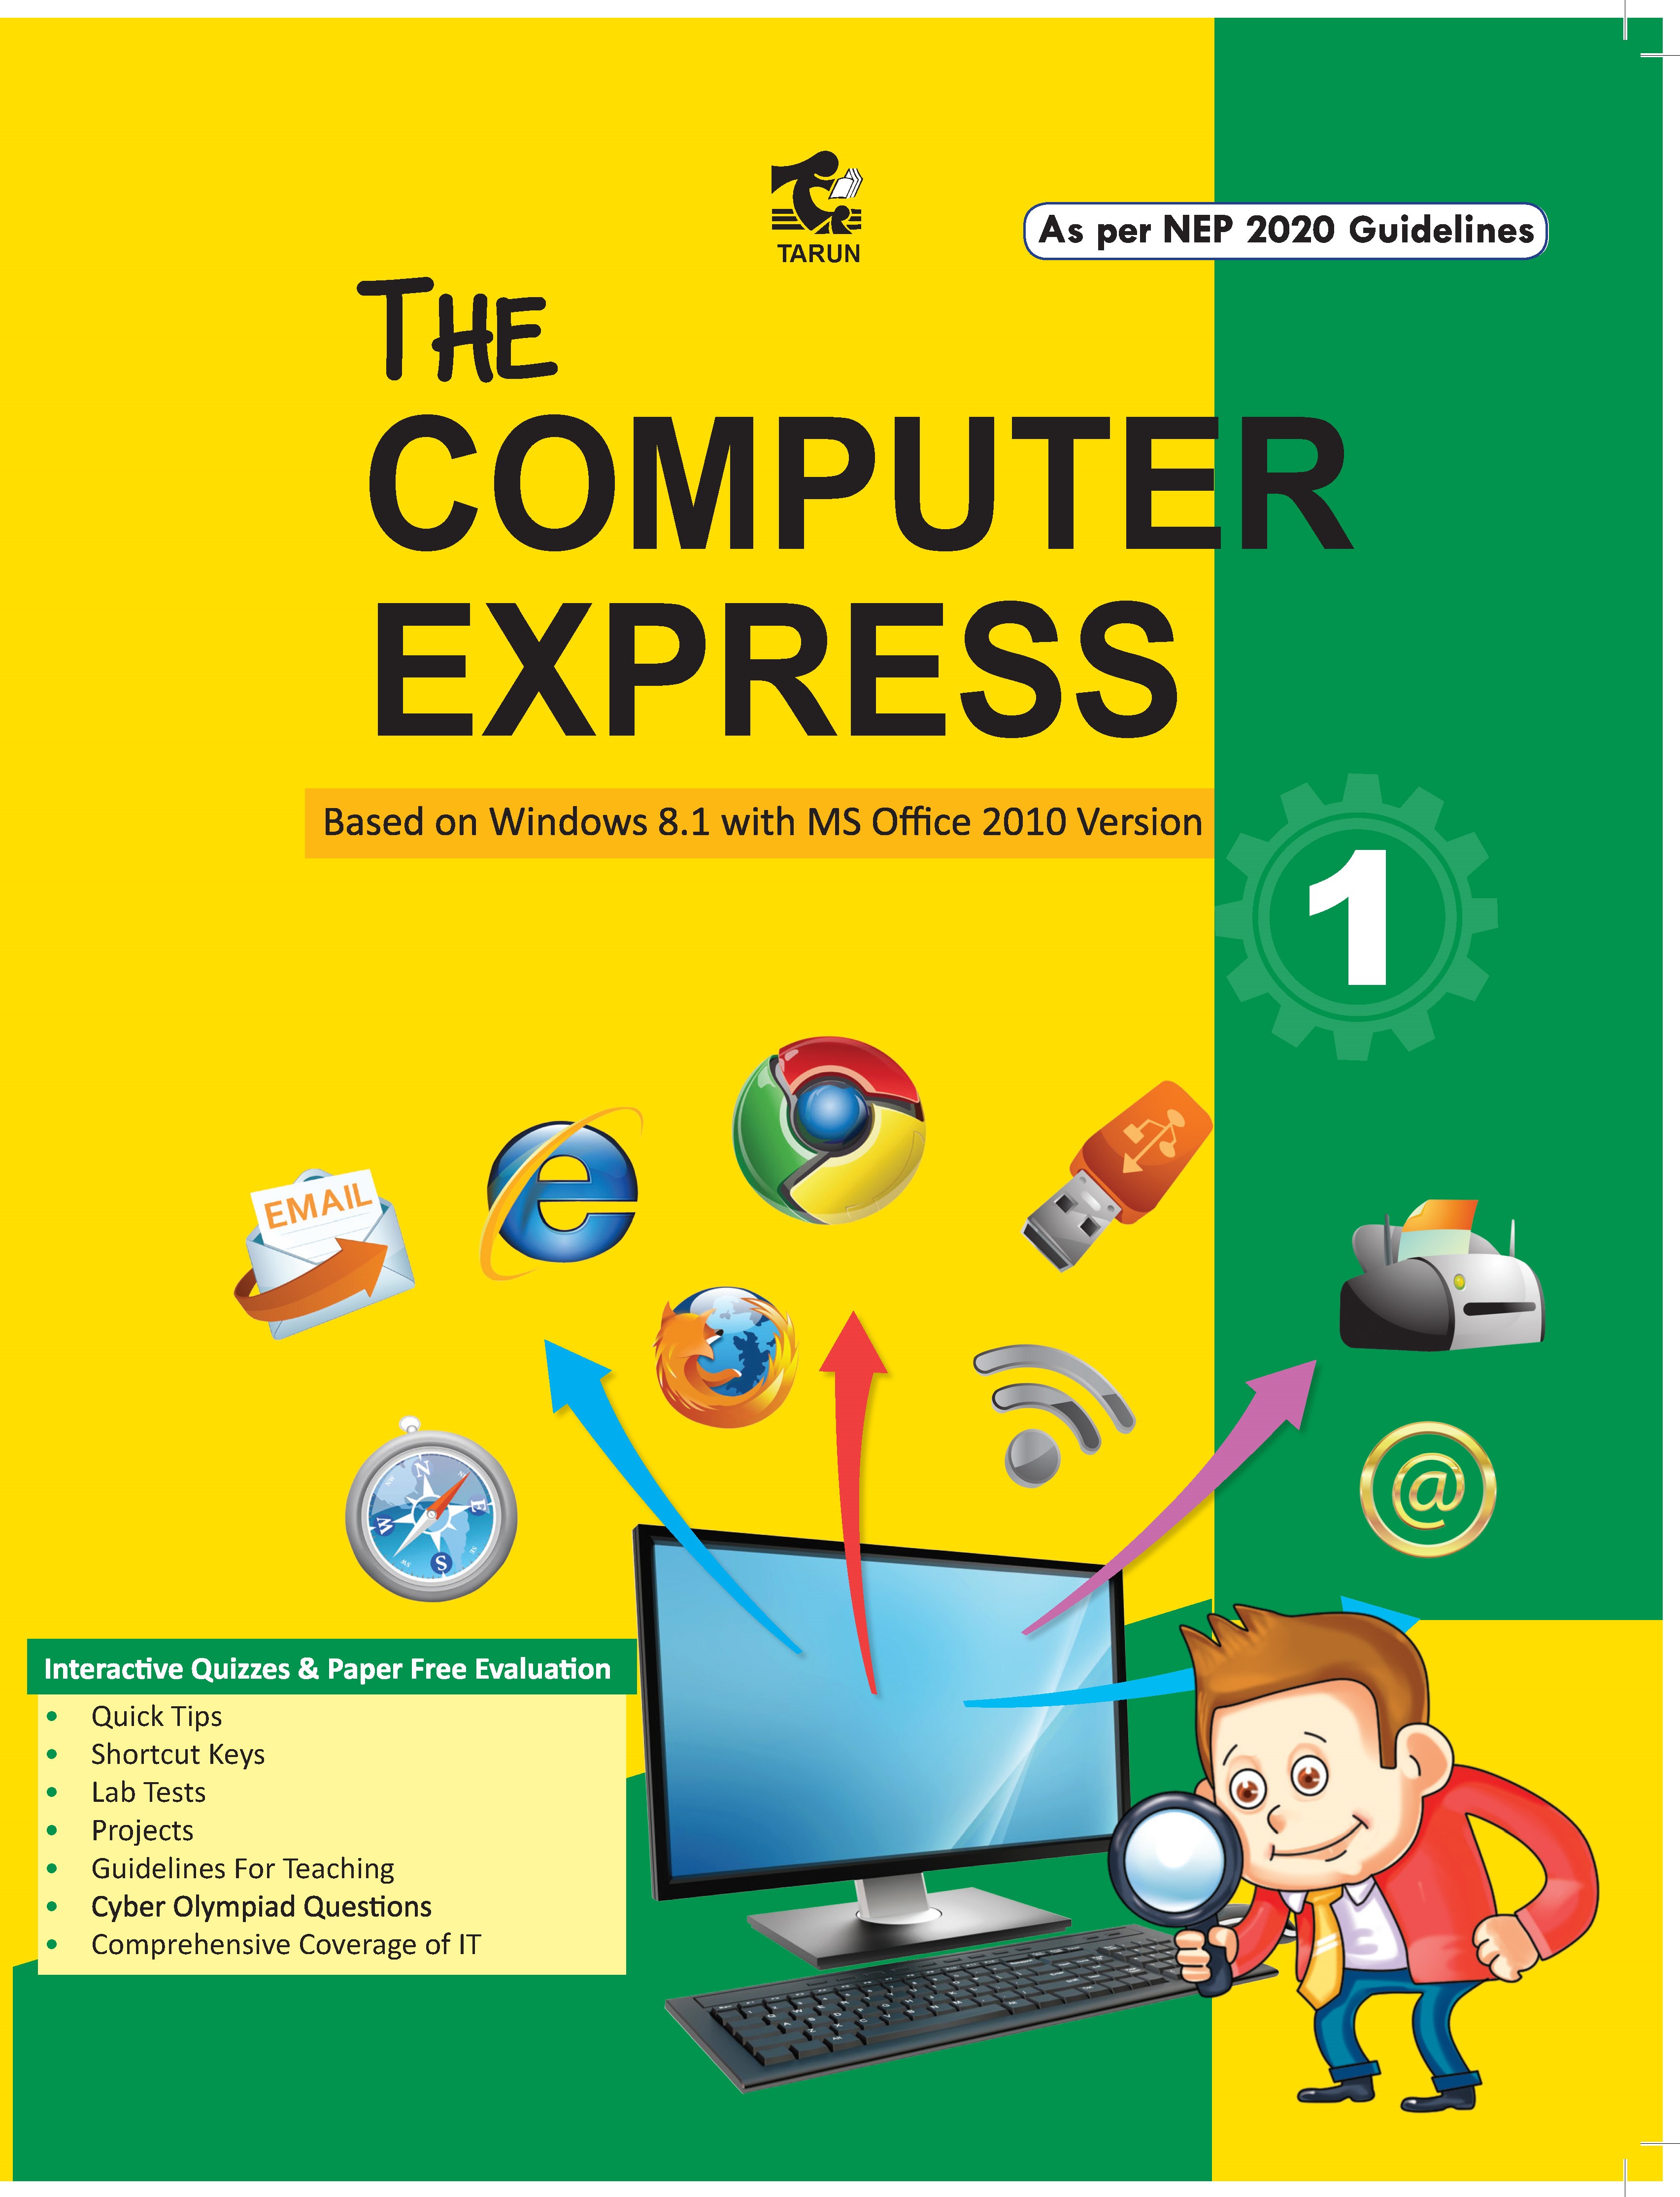 THE COMPUTER EXPRESS 1